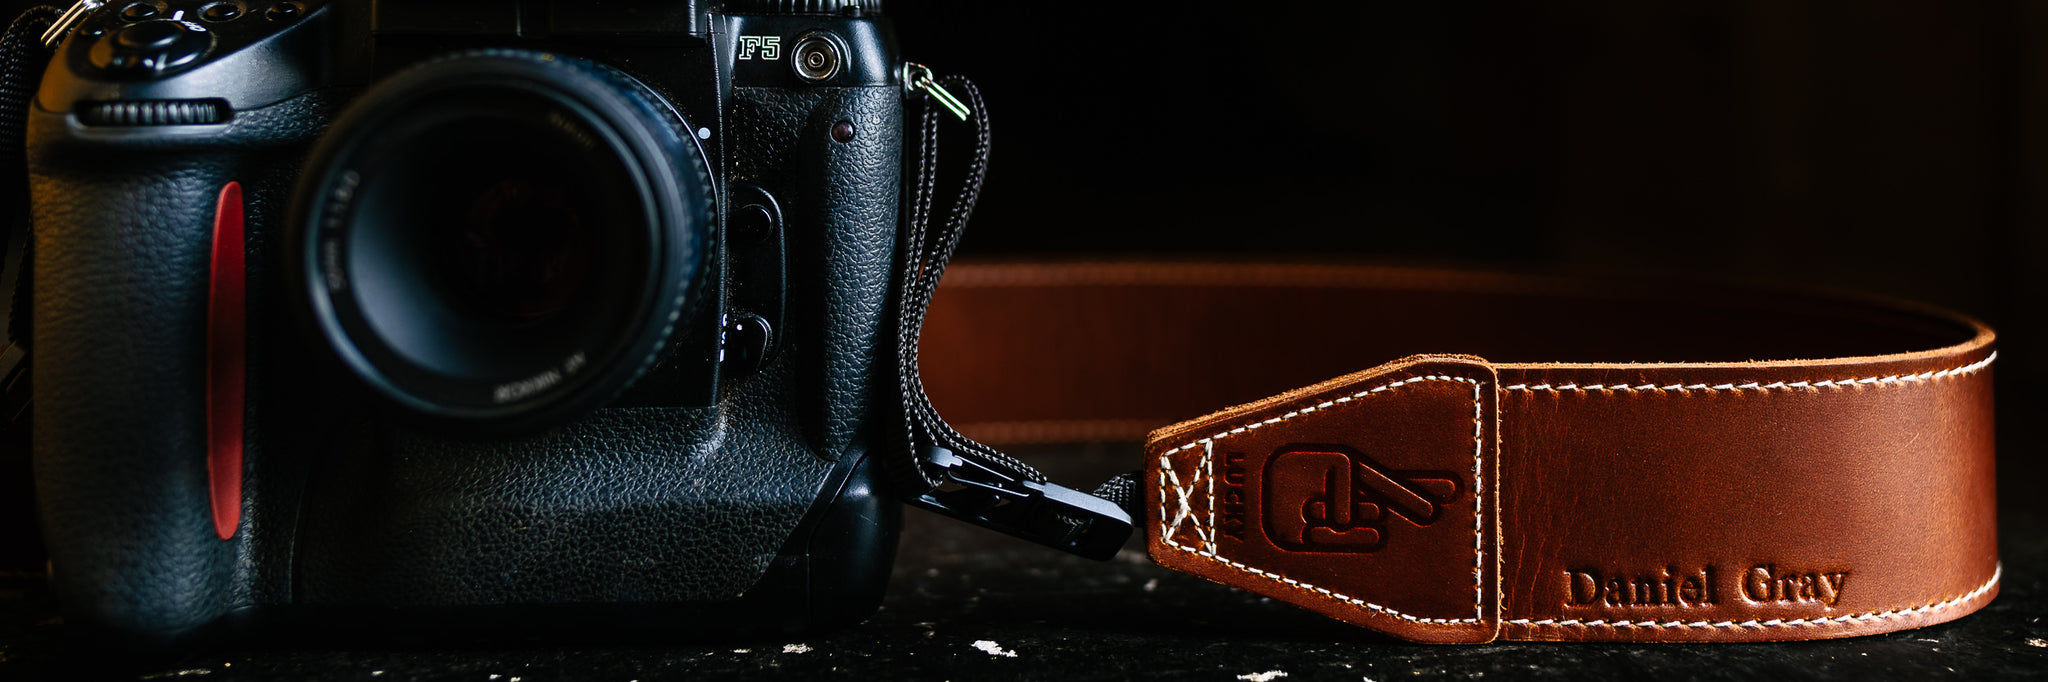 Lucky Camera Straps Personalised Leather Embossing for Photography Gift